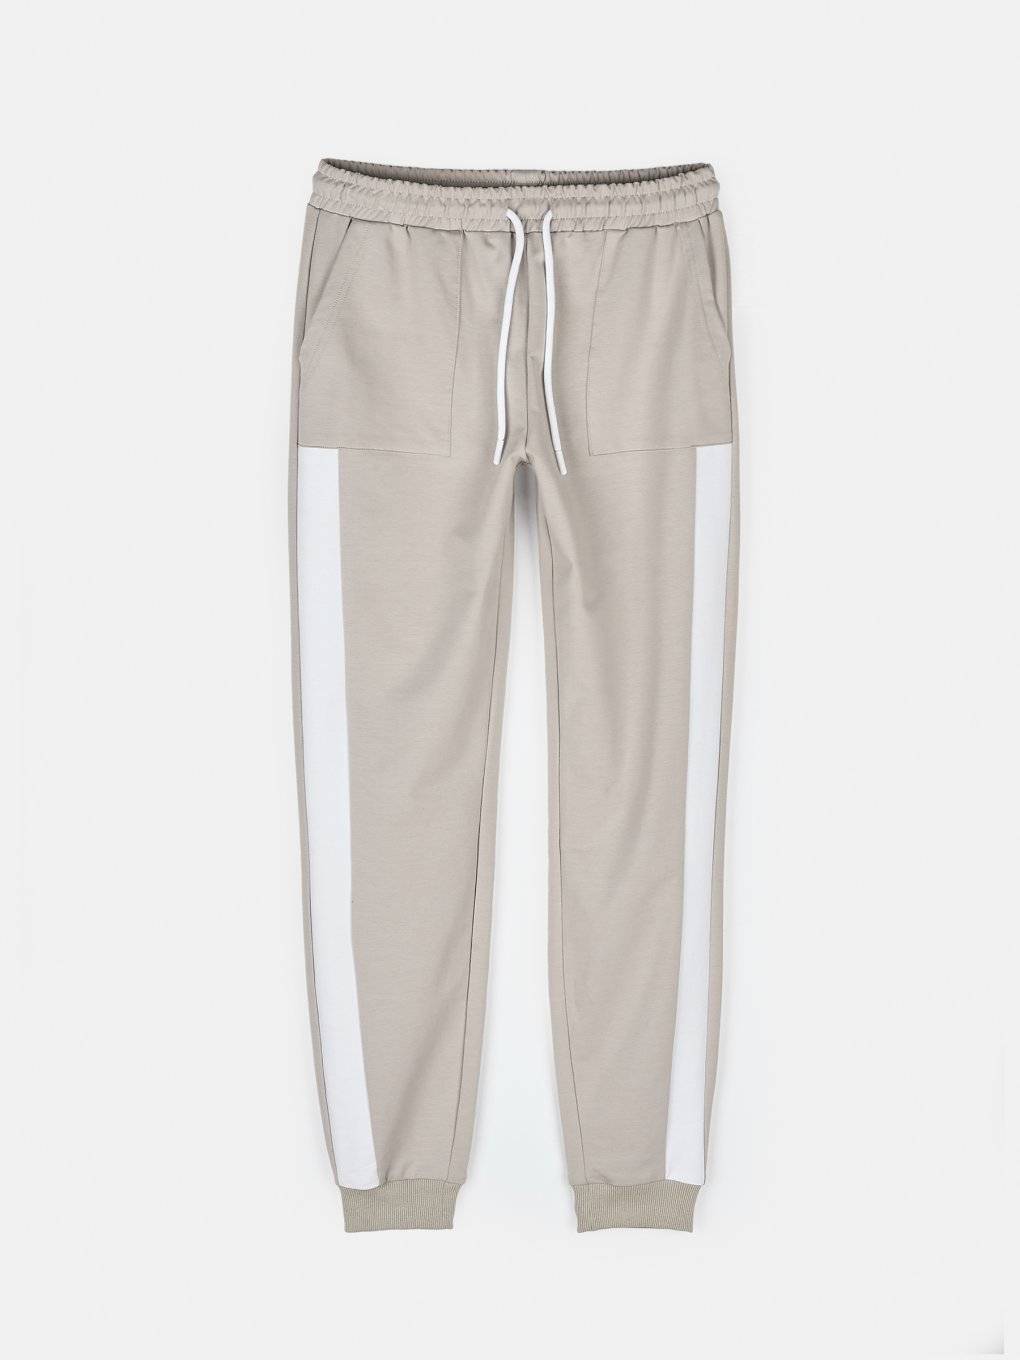 Sweatpants with a side panel